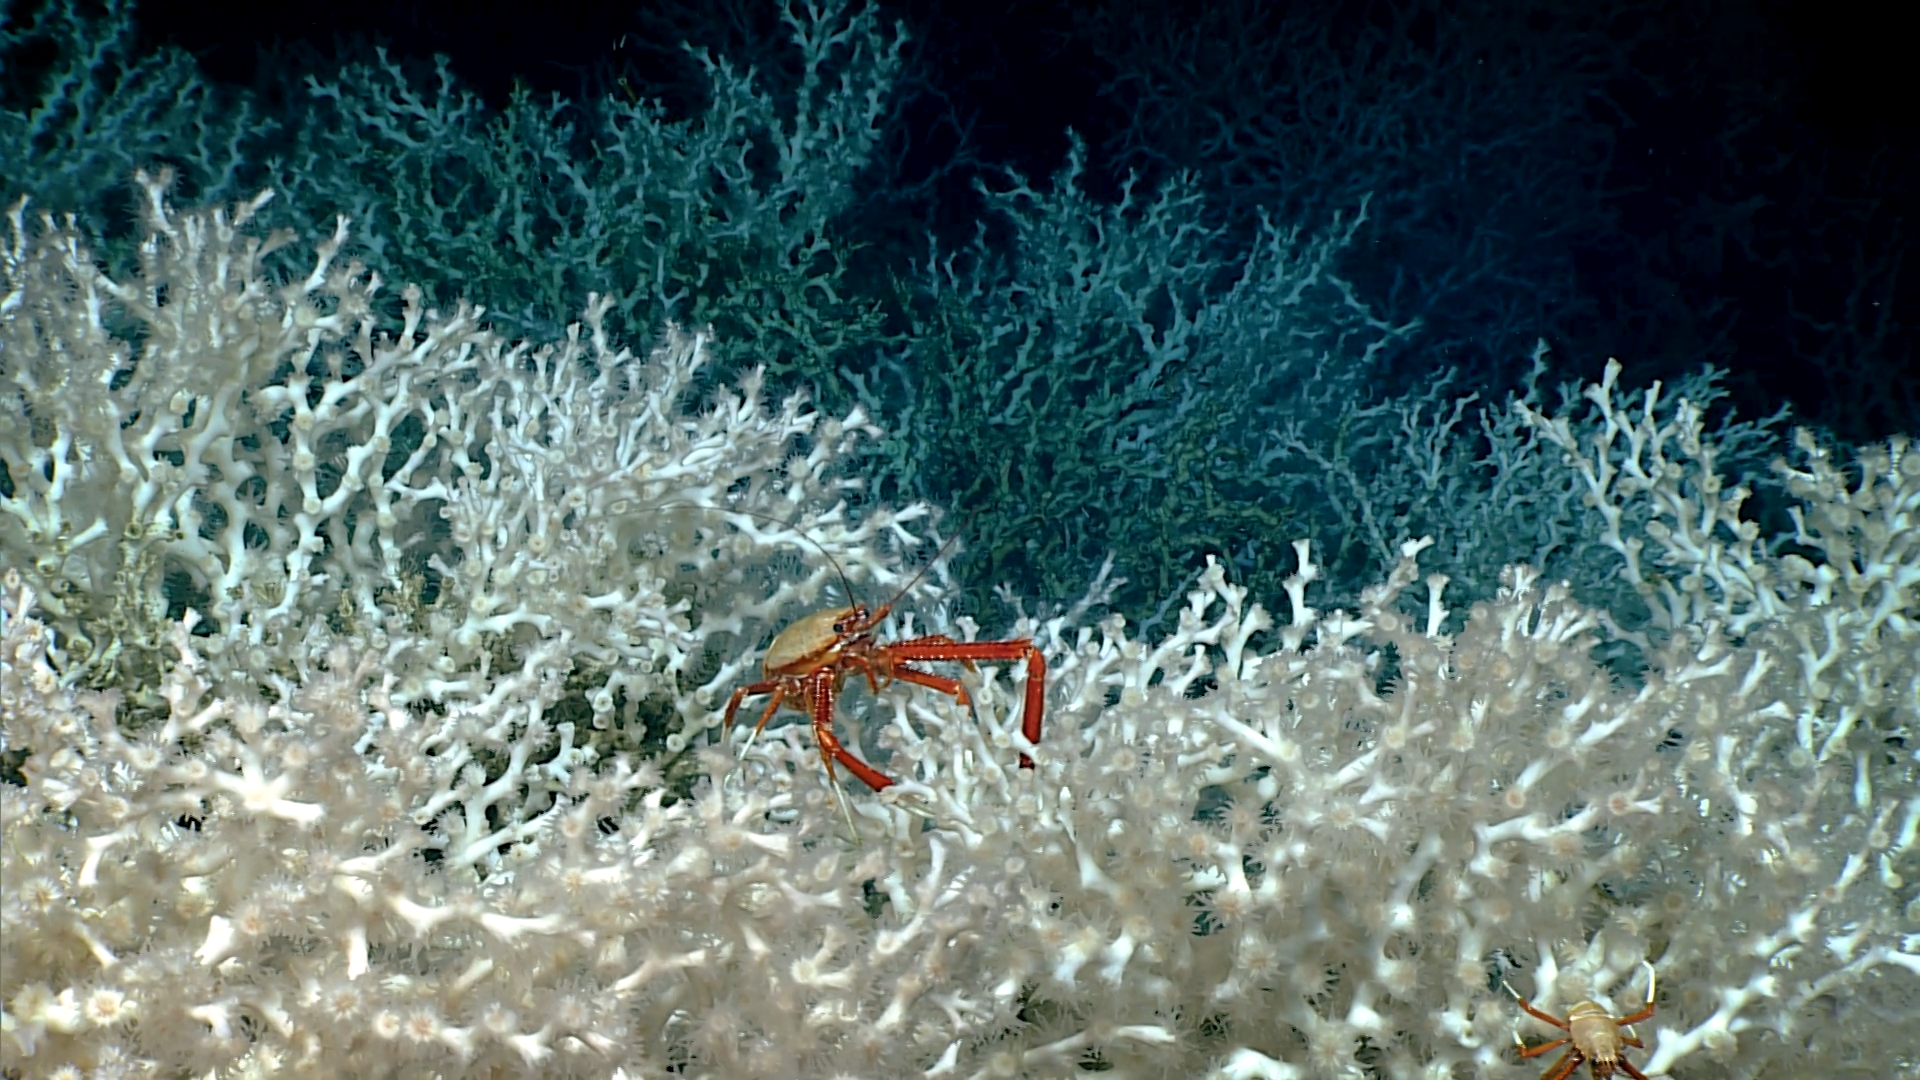 Squat lobsters on Lophelia pertusa coral at a depth of roughly 1,740 feet in the Gulf of Mexico, April 2018.